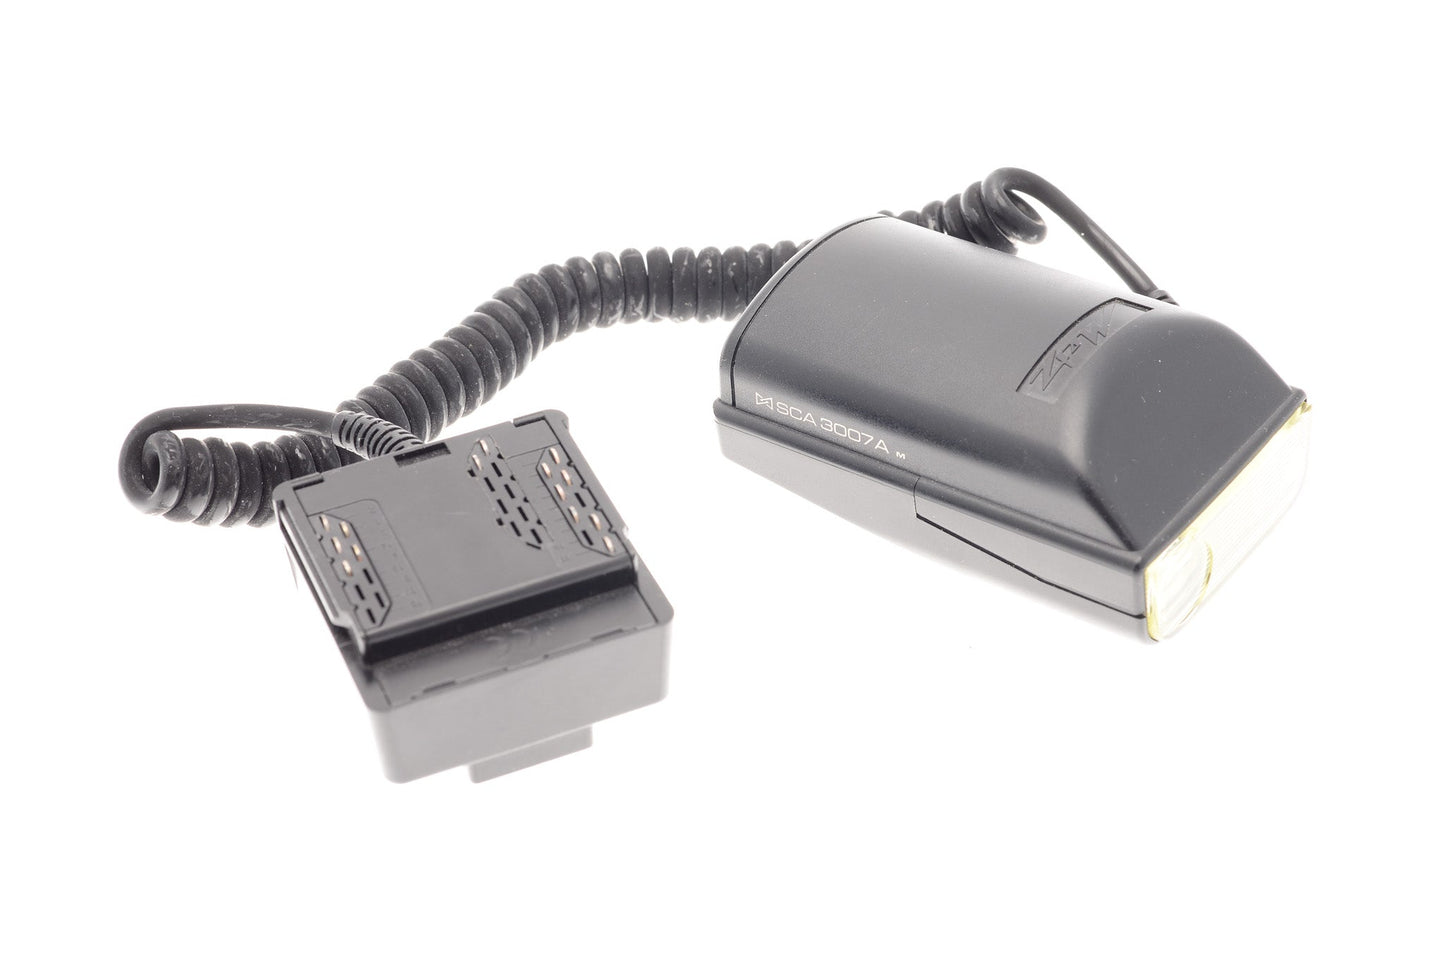 Metz SCA 3007A M Extension Cable Cord - Accessory